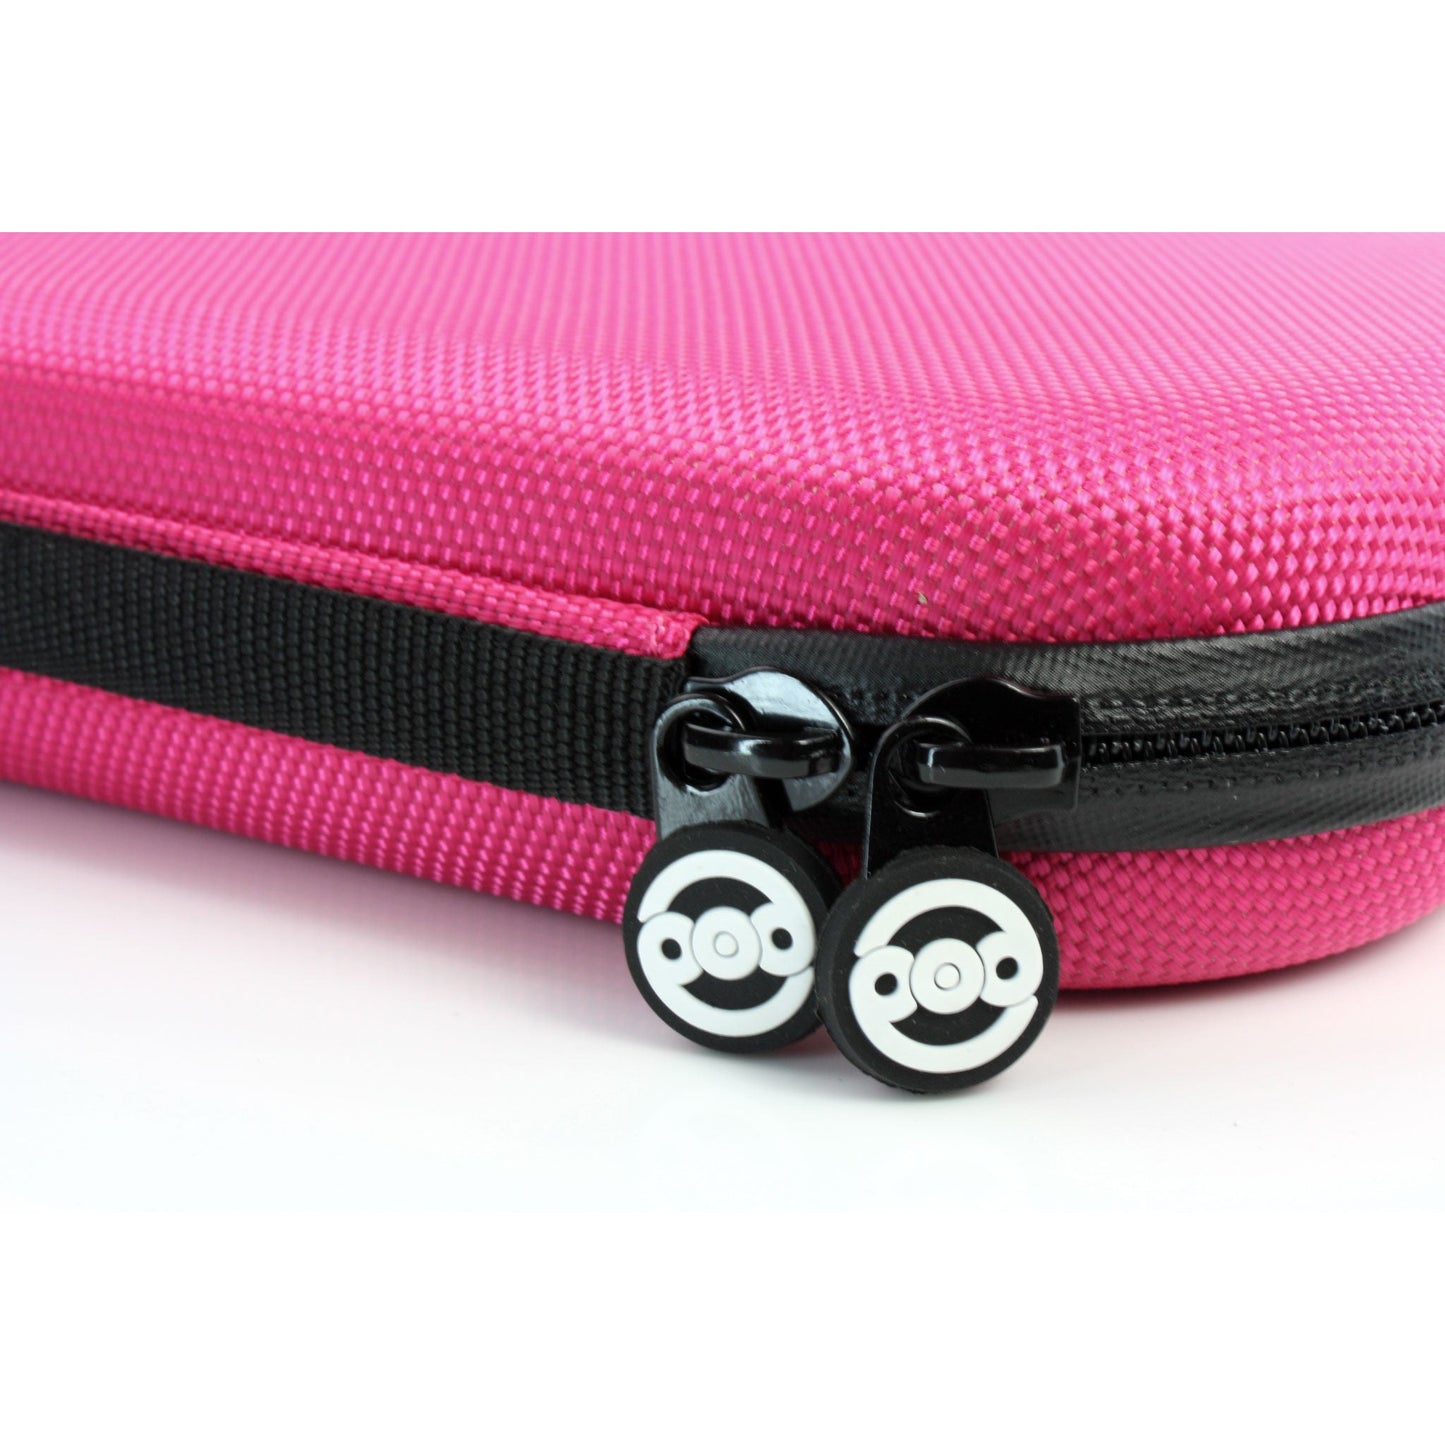 cardiopod Stethoscope Case - Pod Technical Premium Cardiology Carry Case - Hot Pink